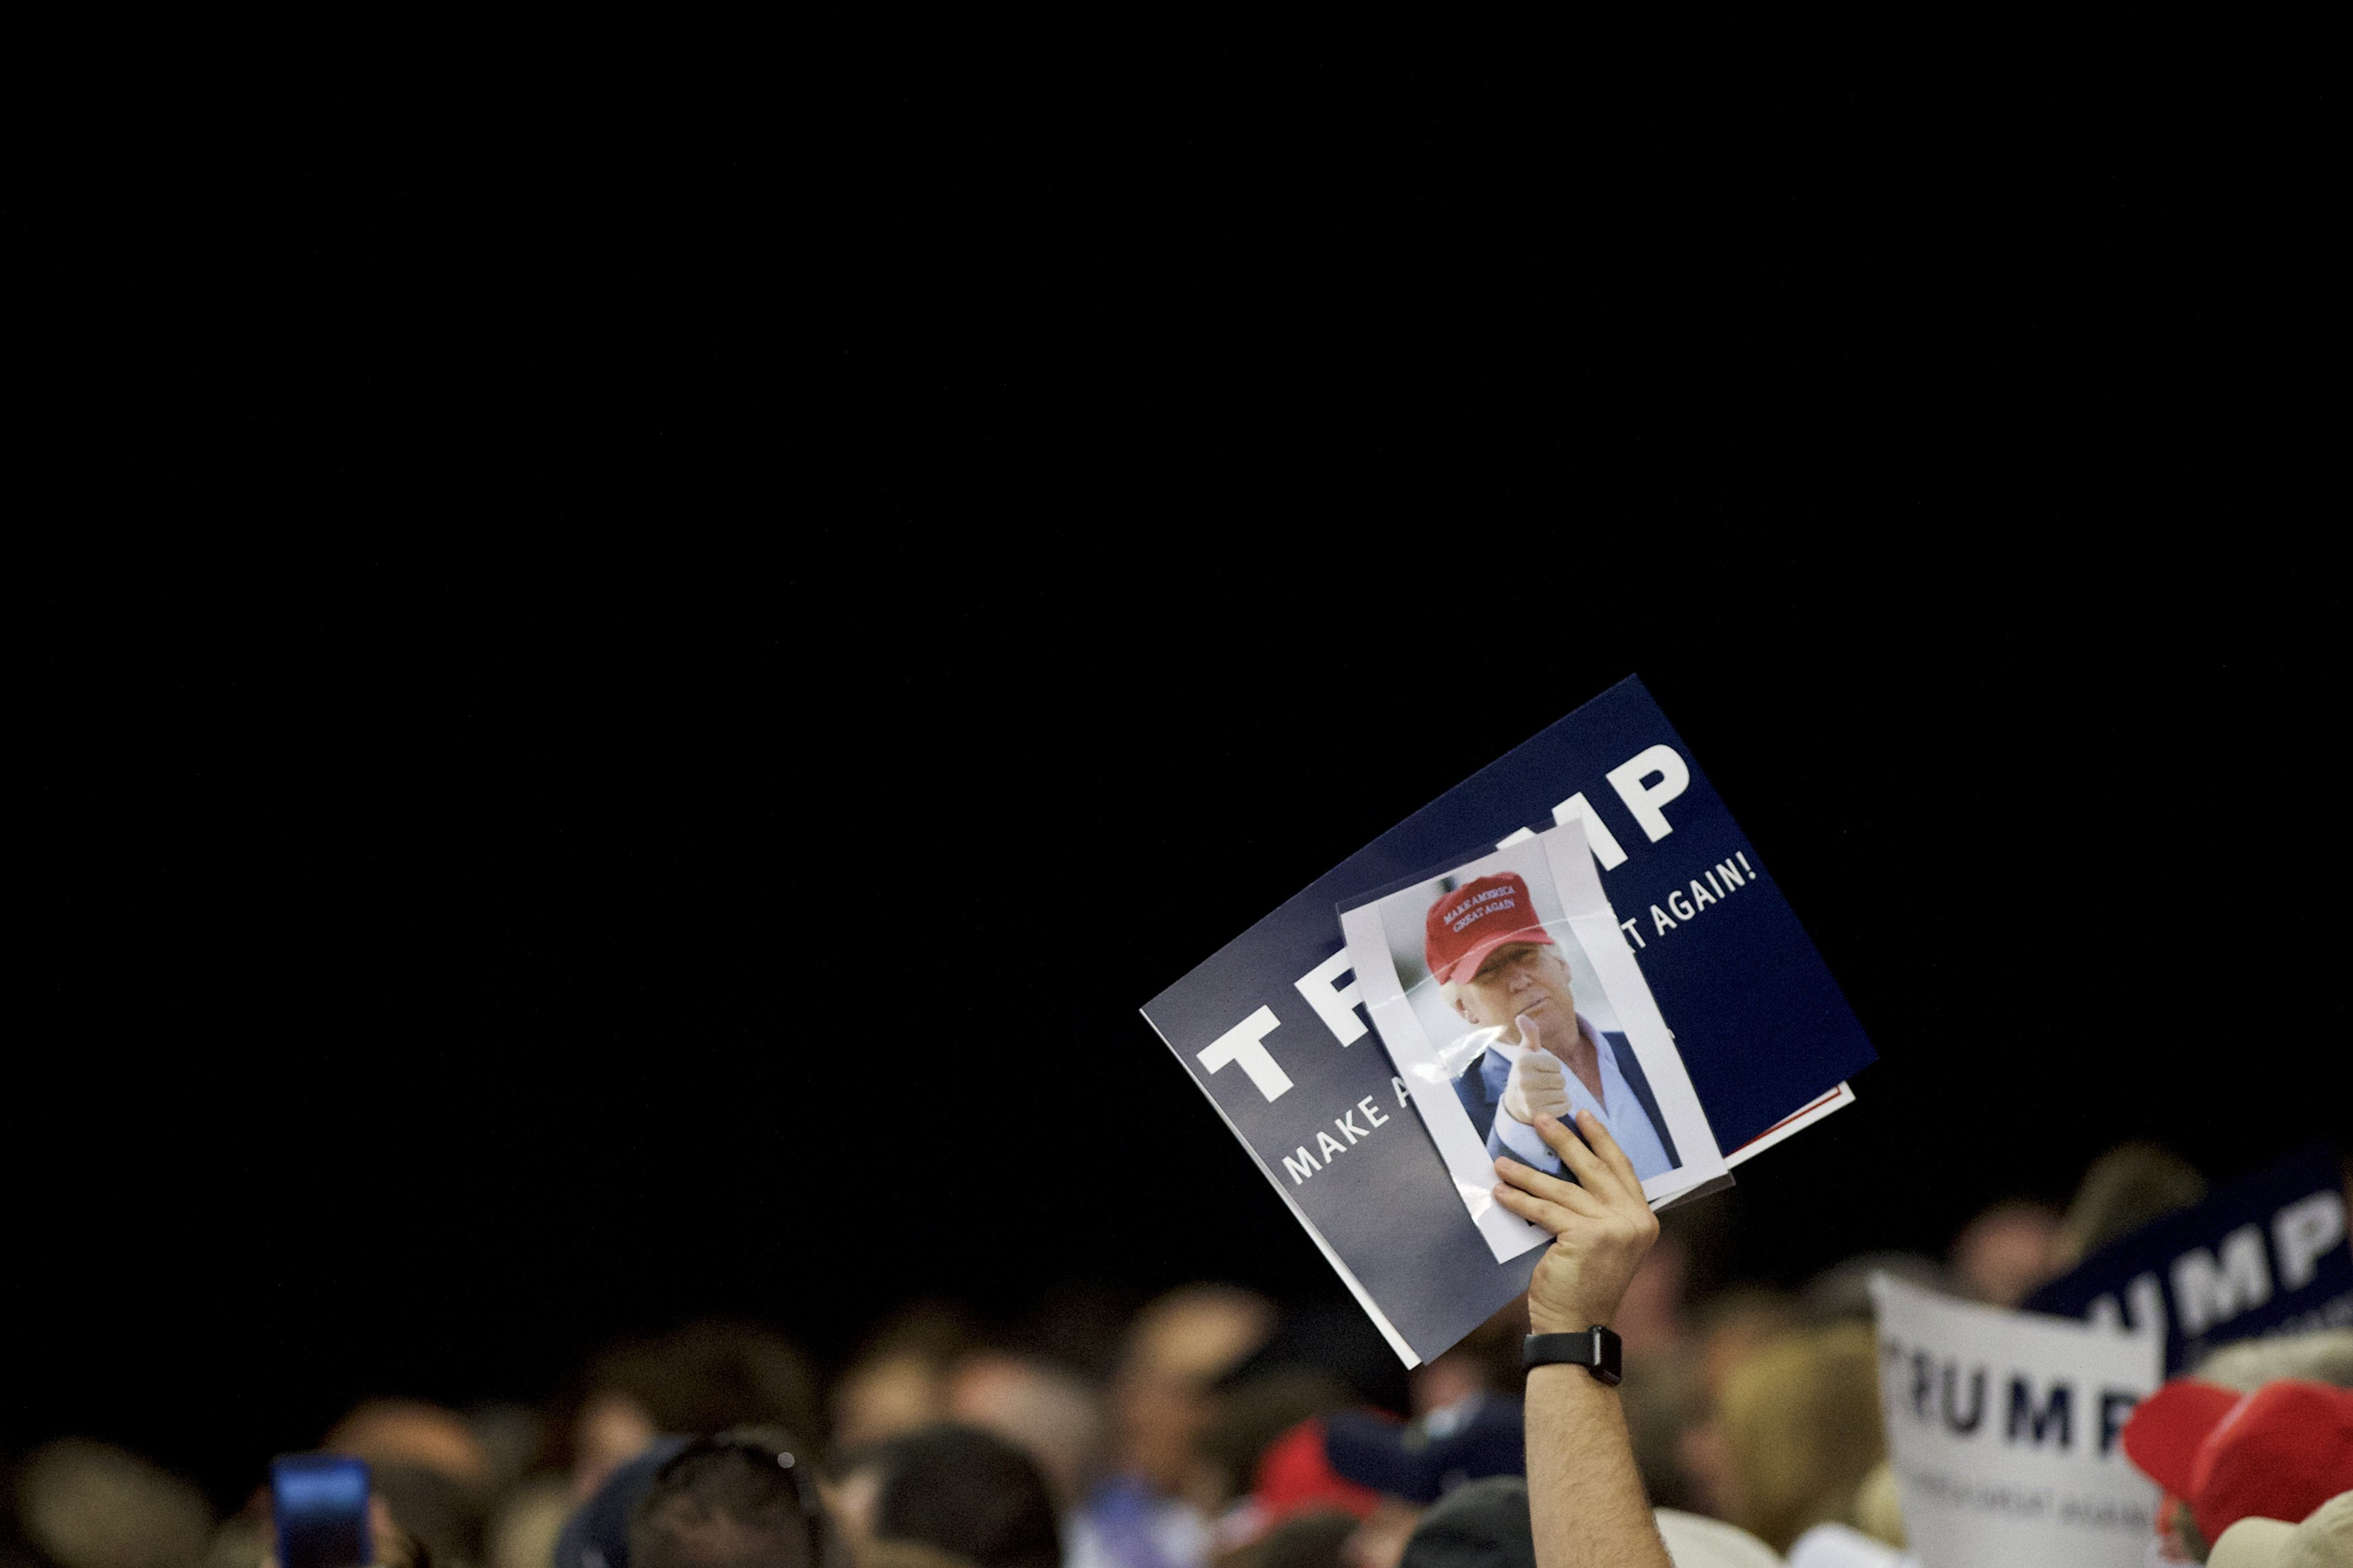 A Donald Trump supporter during a rally at the Pennsylvania Farm Show Complex & Expo Center in Harrisburg, Pa., on April 21, 2016. (Mark Makela—Getty Images)